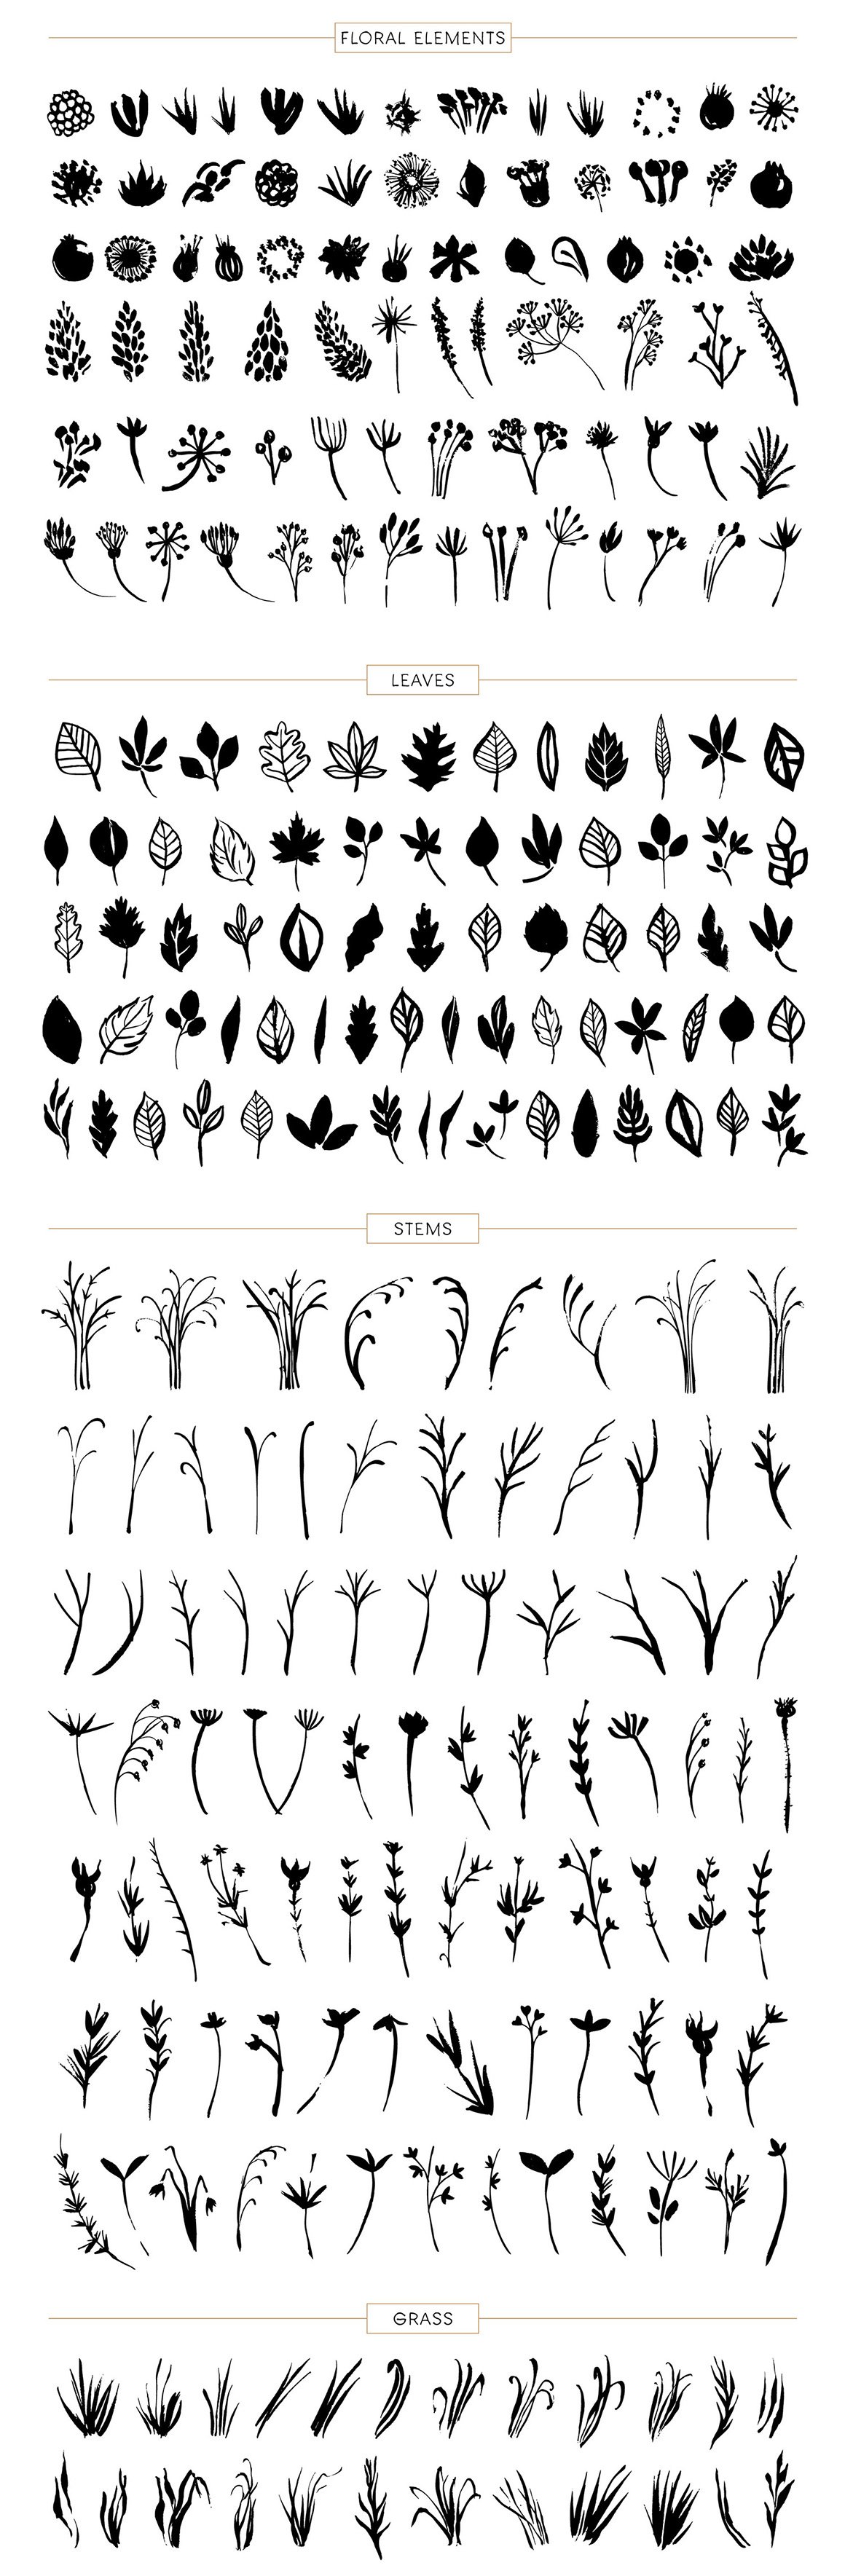 Floral Notes: 400+ Hand-Drawn Nature Elements